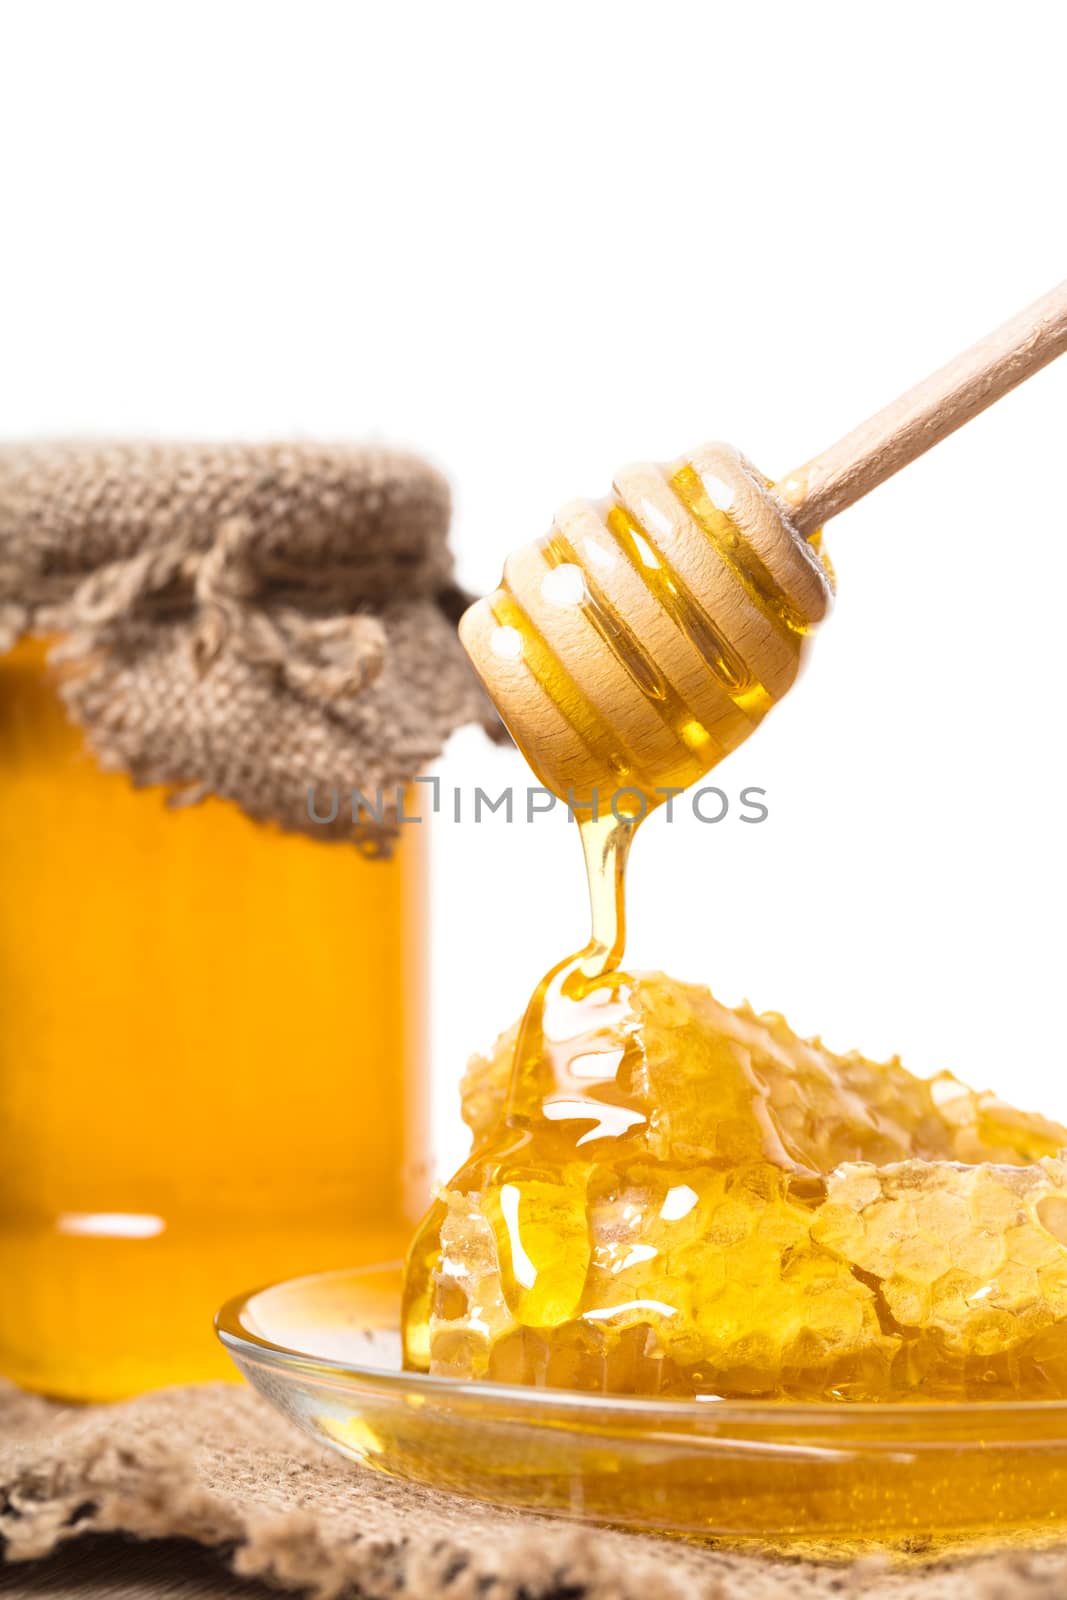 Honey dripping from wooden spoon on a honeycomb